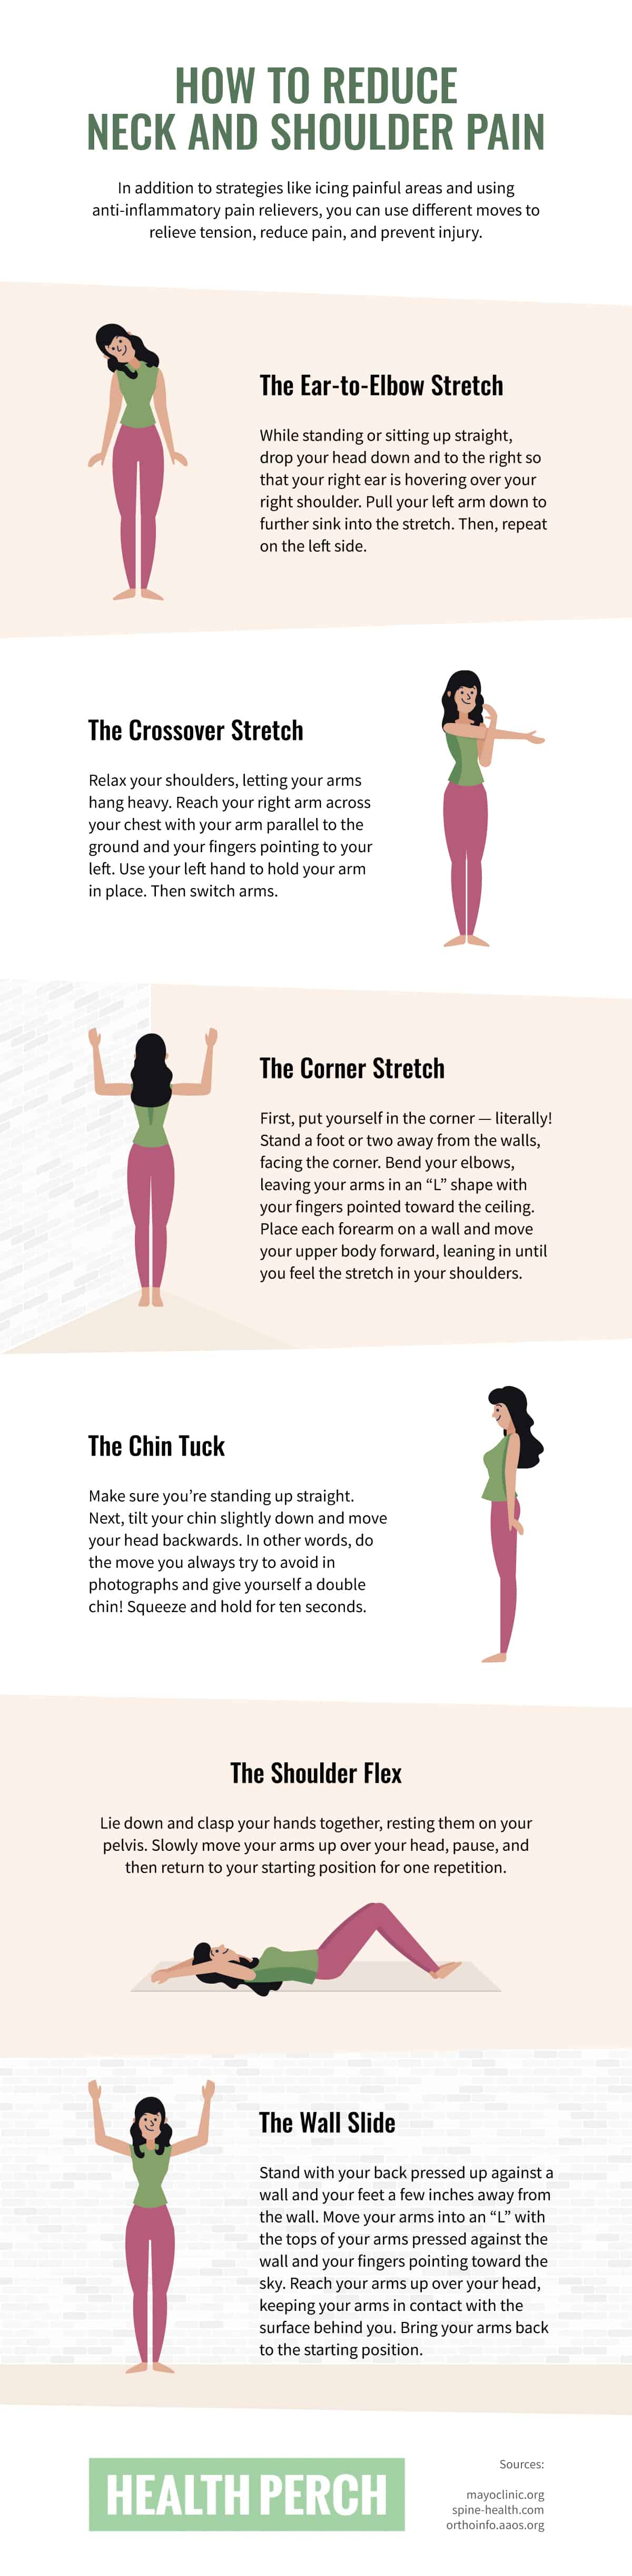 Reduce Neck and Shoulder Pain Infographic